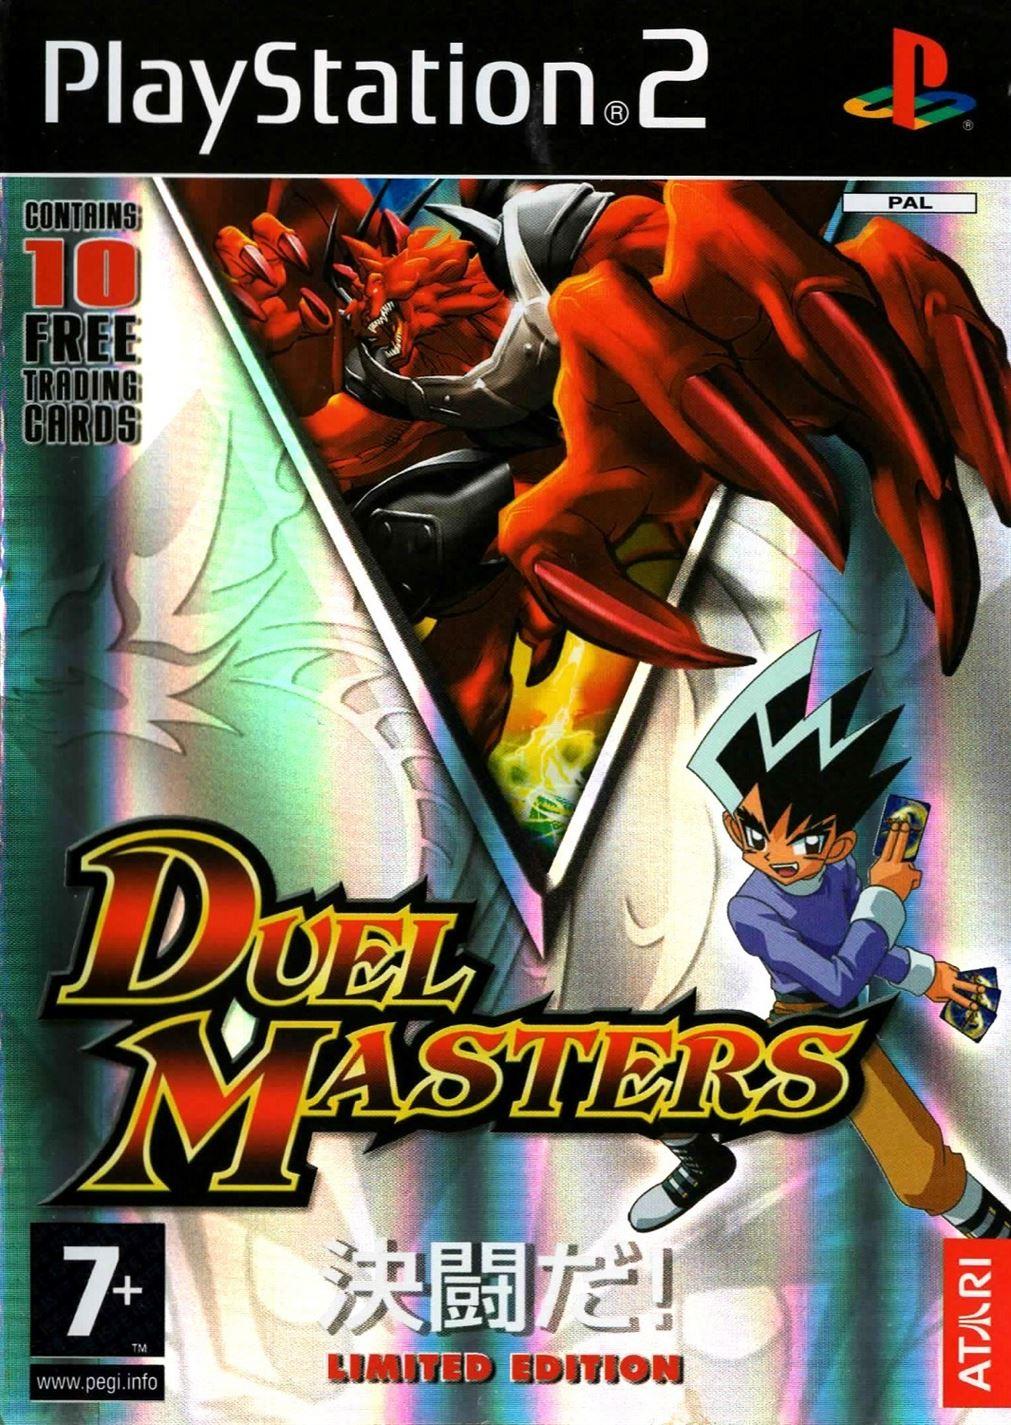 Duel Masters: Limited Edition PS2 (Playstation 2) - Free Postage - UK Seller